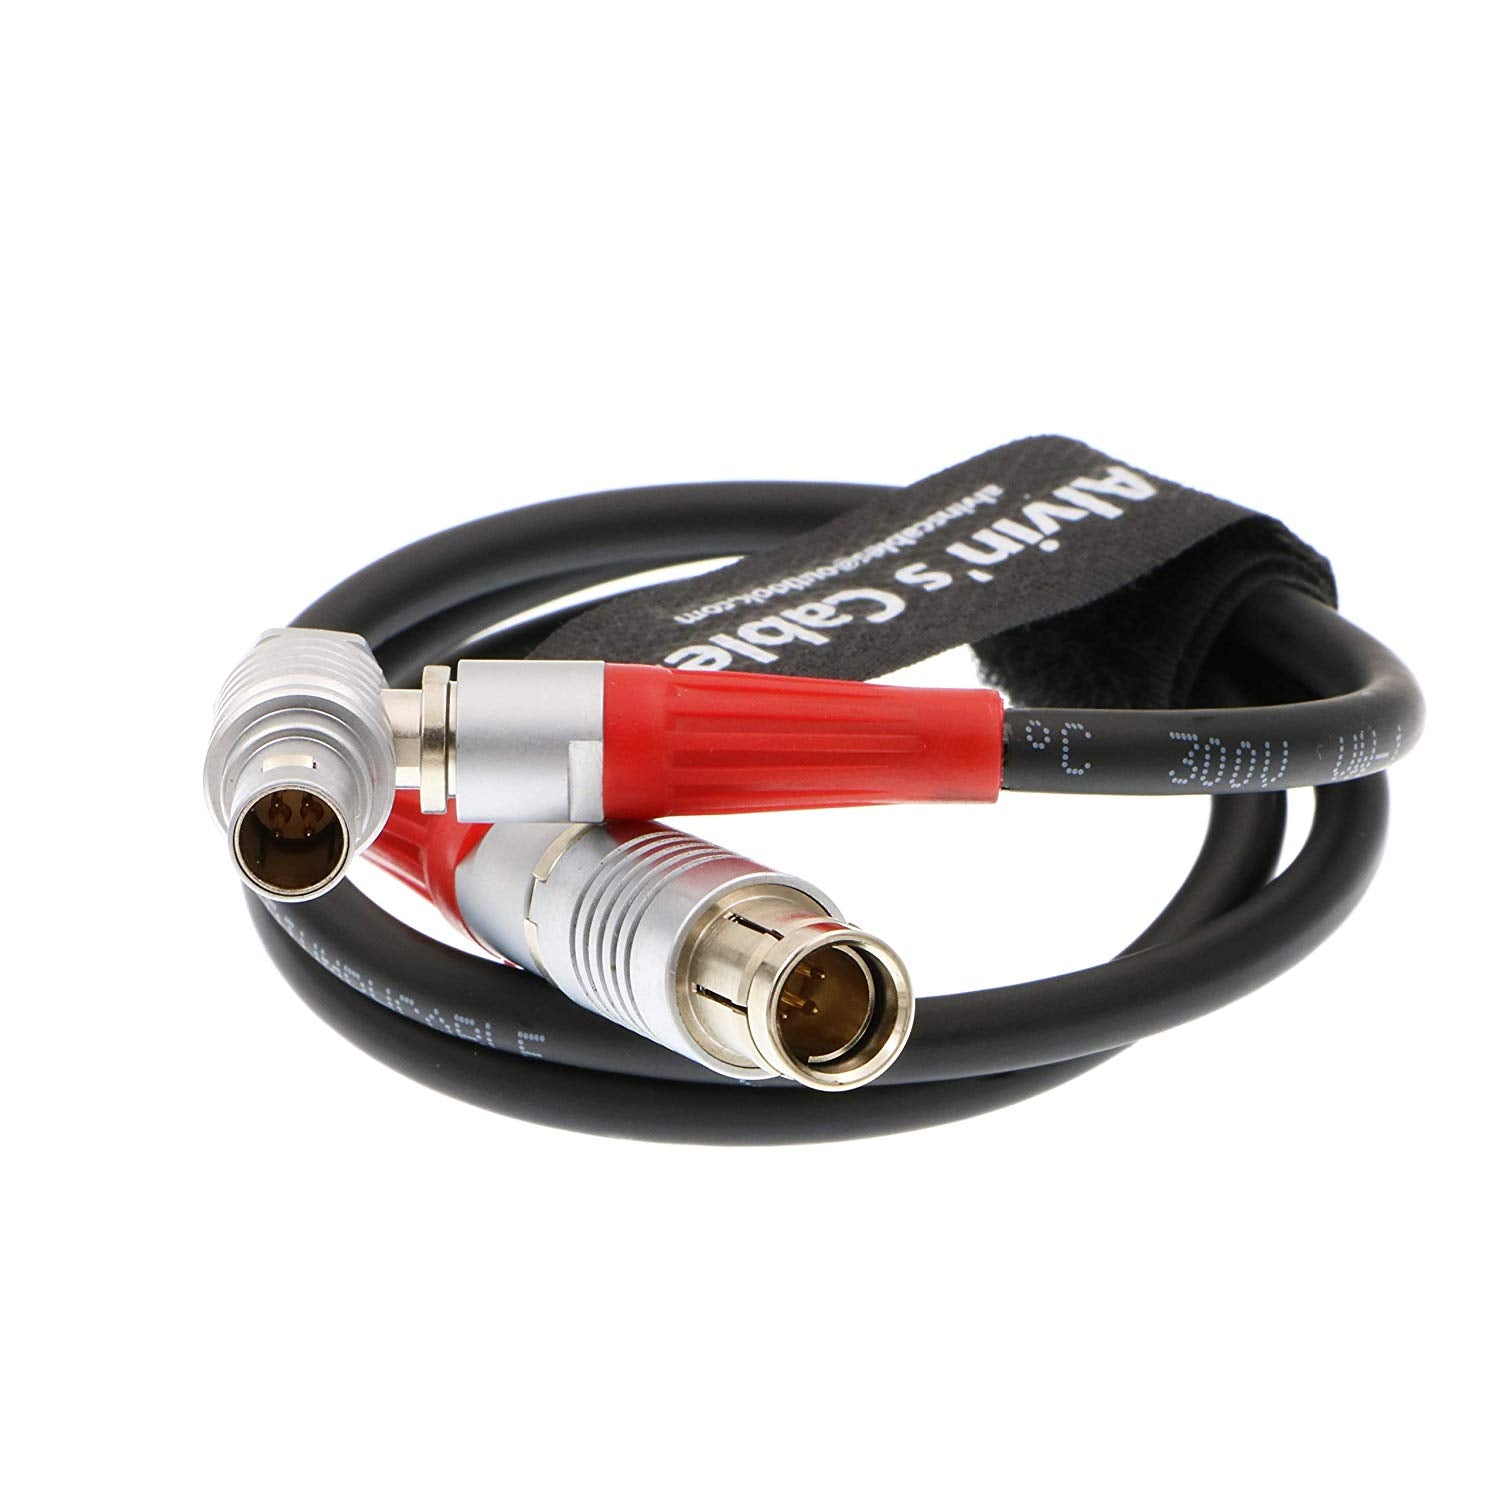 Alvin's Cables 5 pin ARRI LCS to LBUS 4 pin Reverse Right Angle Cable for Arri WCU4 Camera interfaces